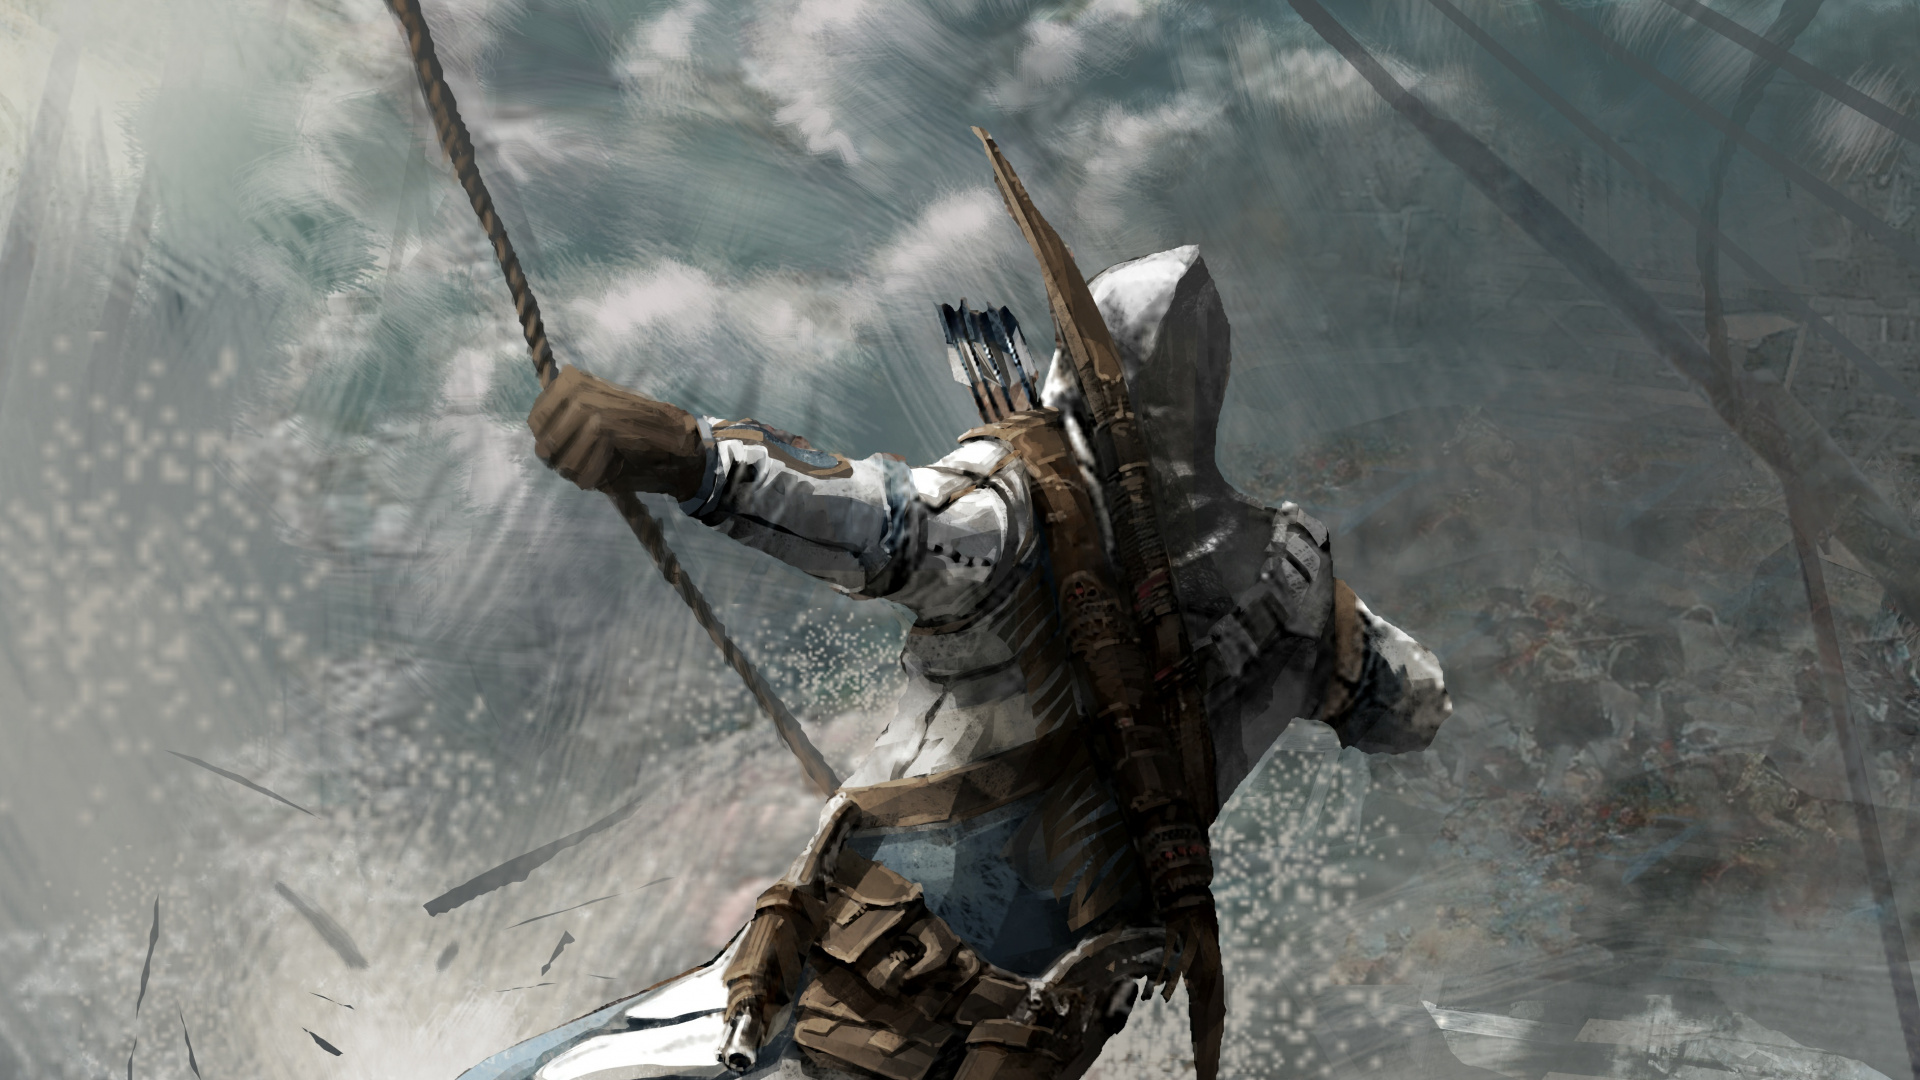 Assassins Creed III, Assassins Creed, Ezio Auditore, Connor Kenway, Ubisoft. Wallpaper in 1920x1080 Resolution